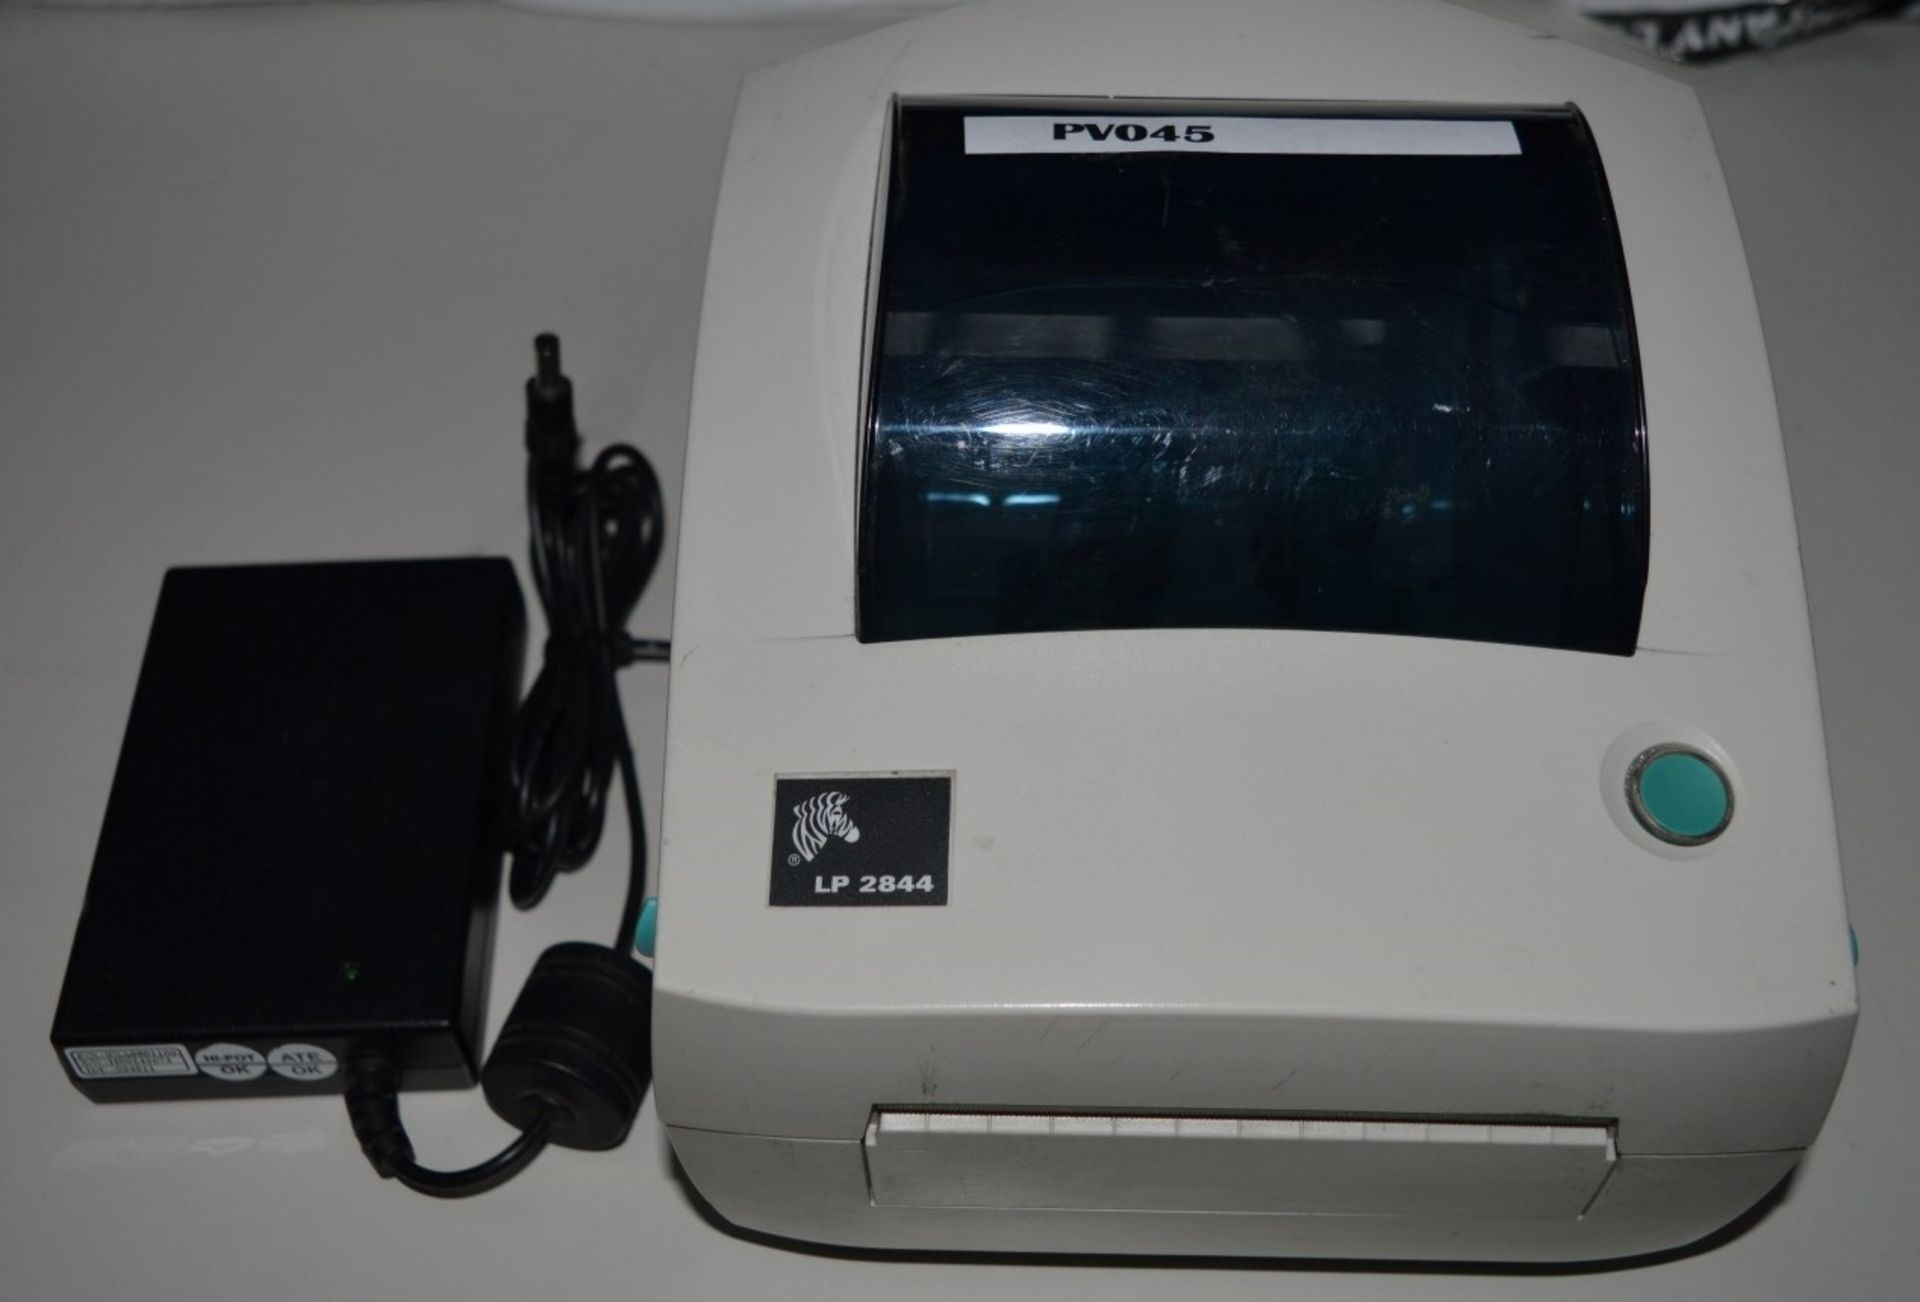 1 x Zebra LP2844 Thermal Label Printer - Includes Power Pack - CL300 - Ref PV045 - Location: